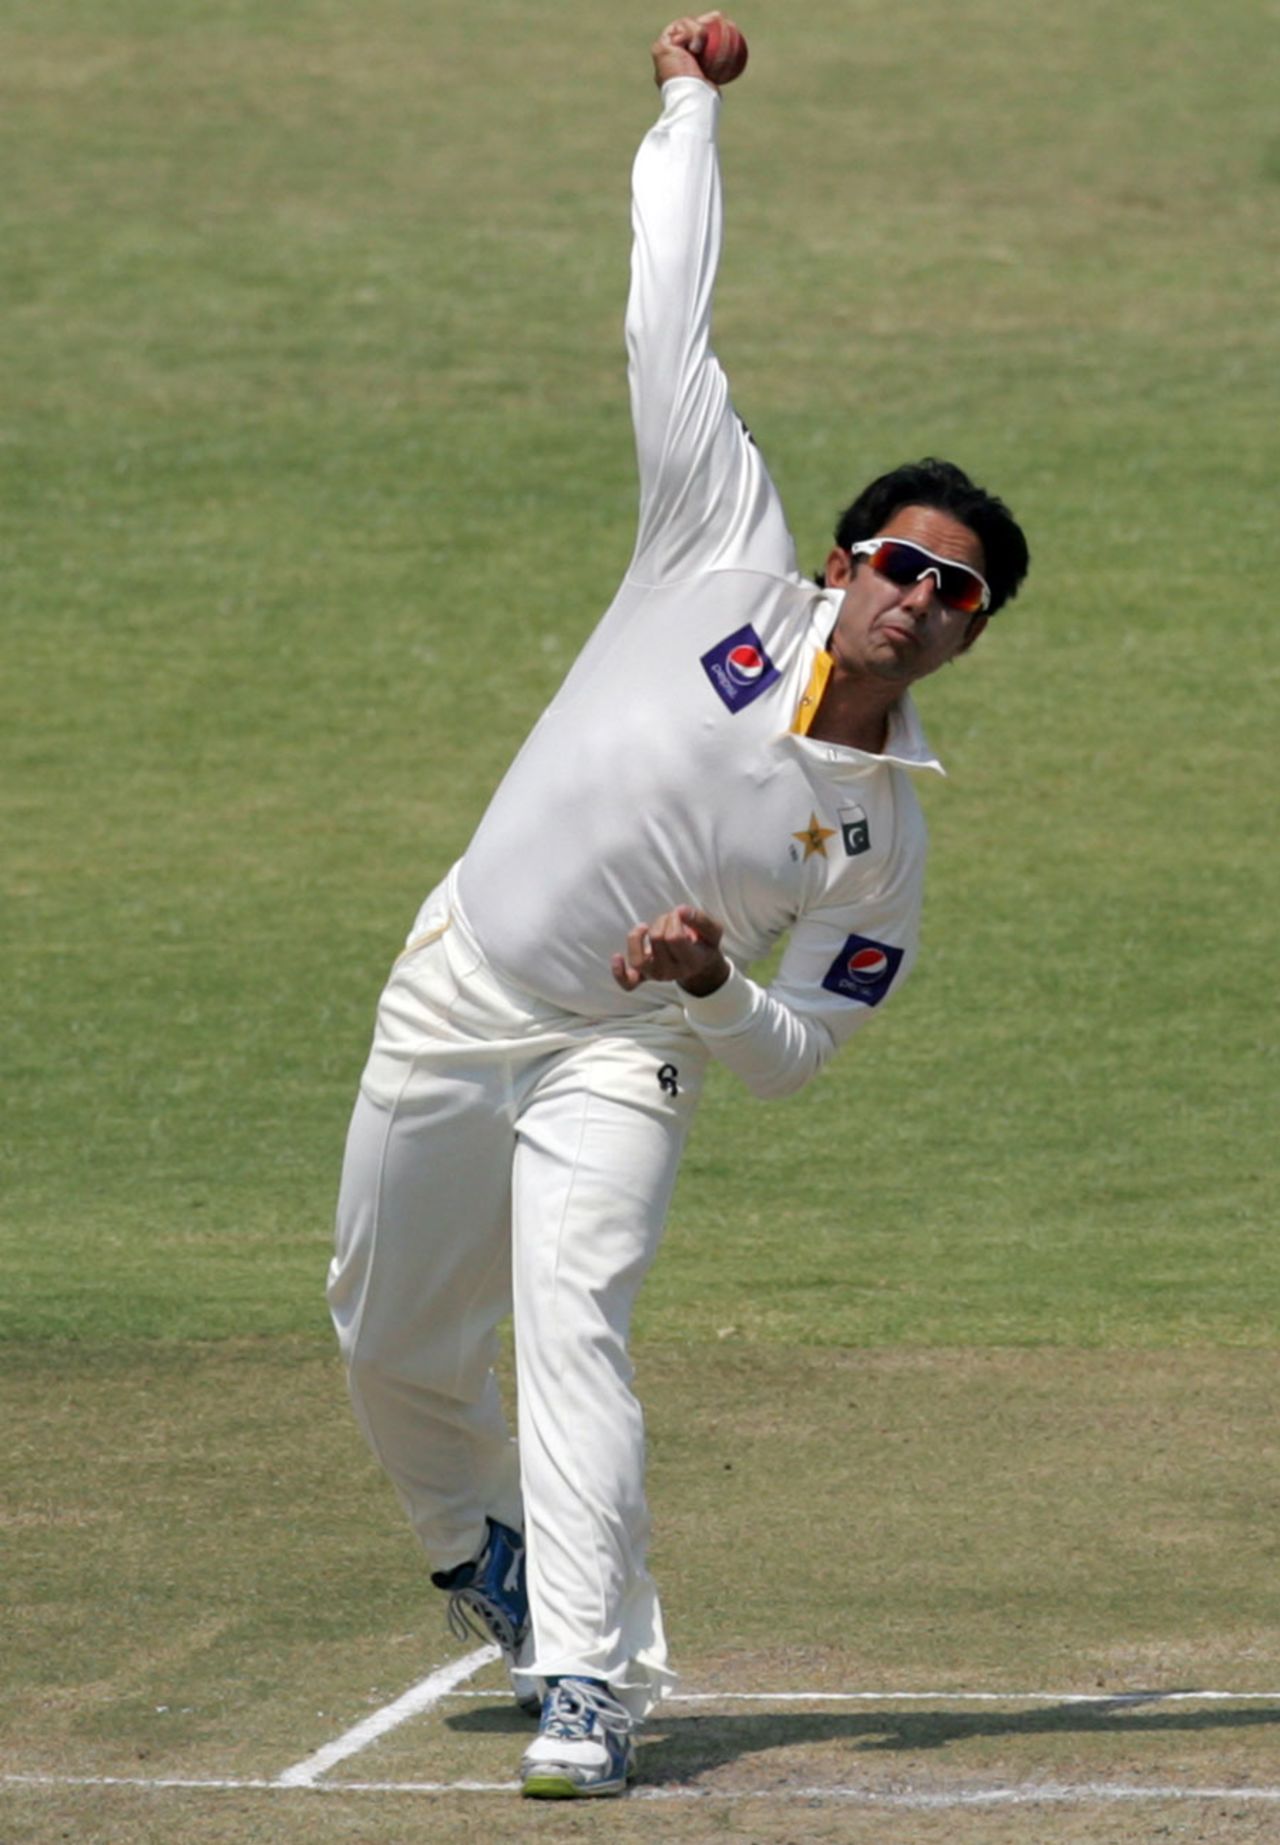 Saeed Ajmal in his delivery stride, Zimbabwe v Pakistan, 2nd Test, Harare, 4th day, September 13, 2013